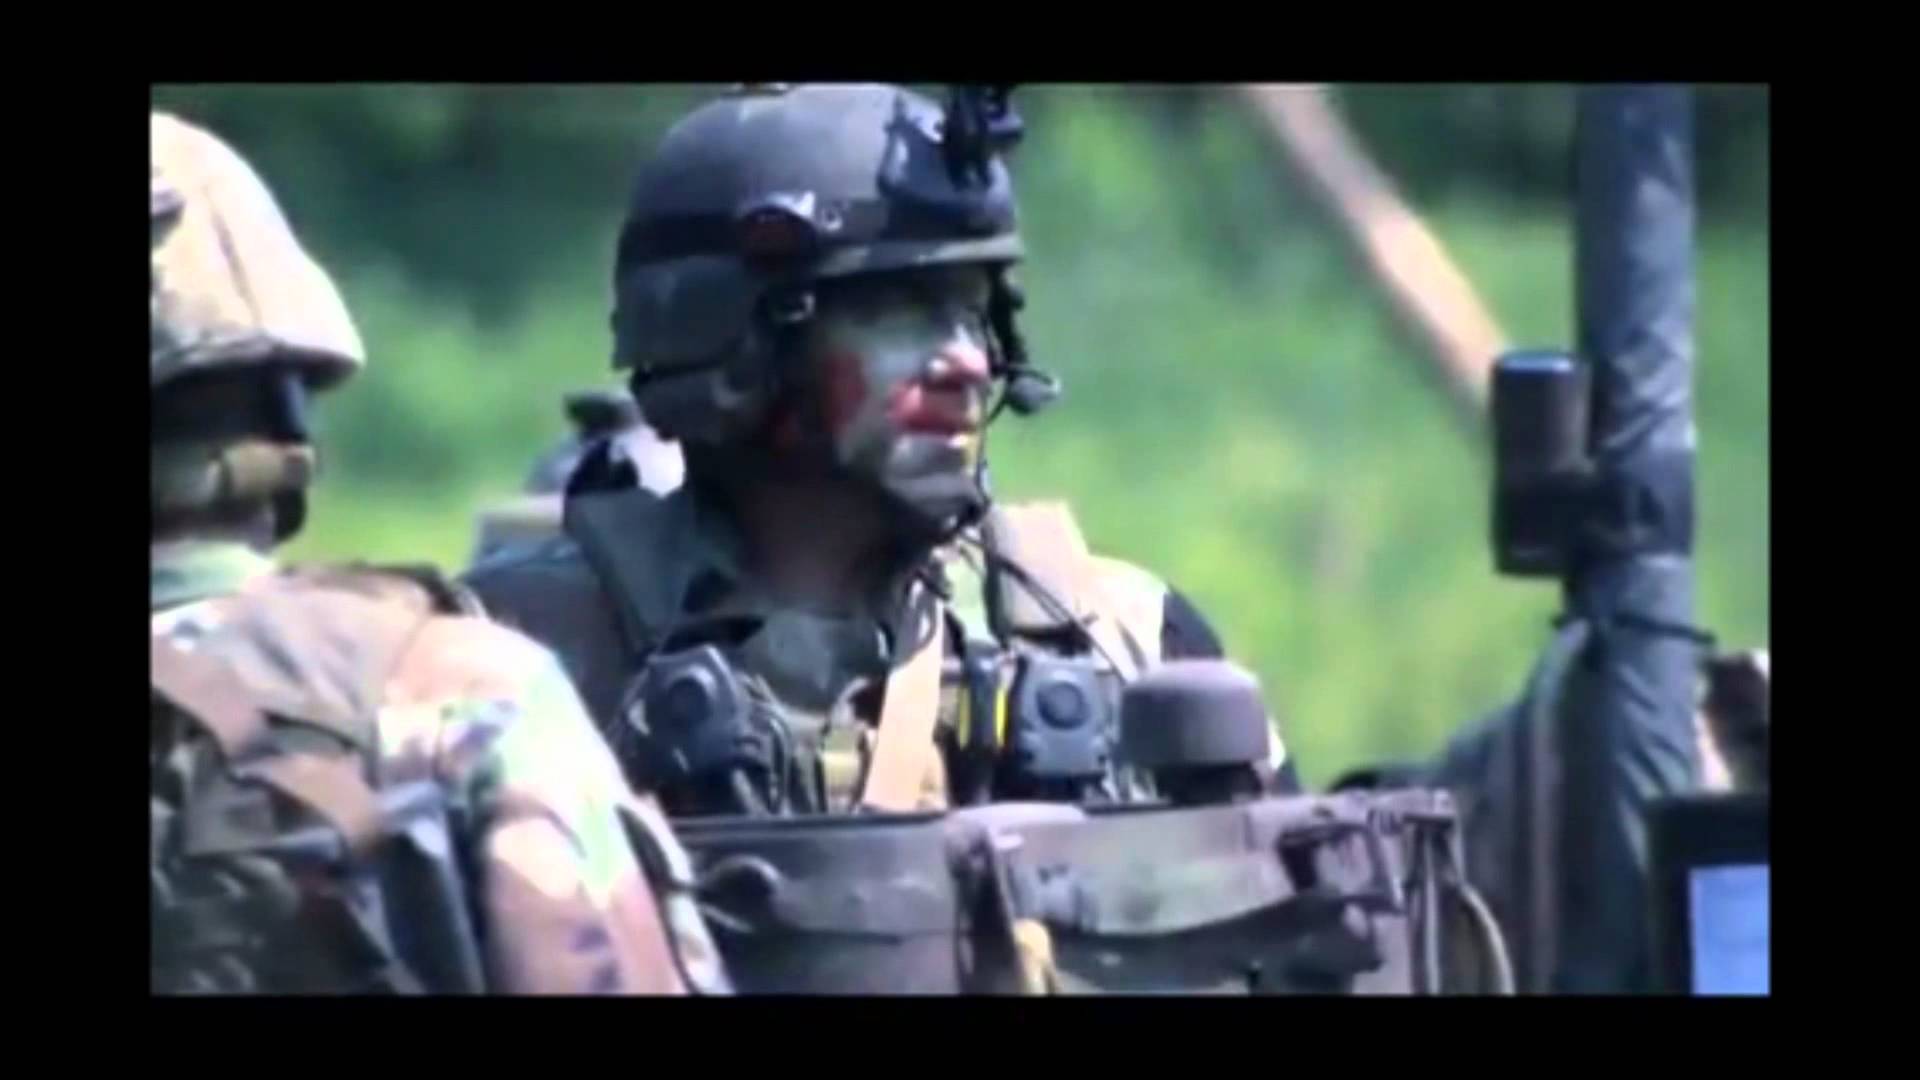 Feint Creed Pararescue, SWCC, and Room clearing action - YouTube